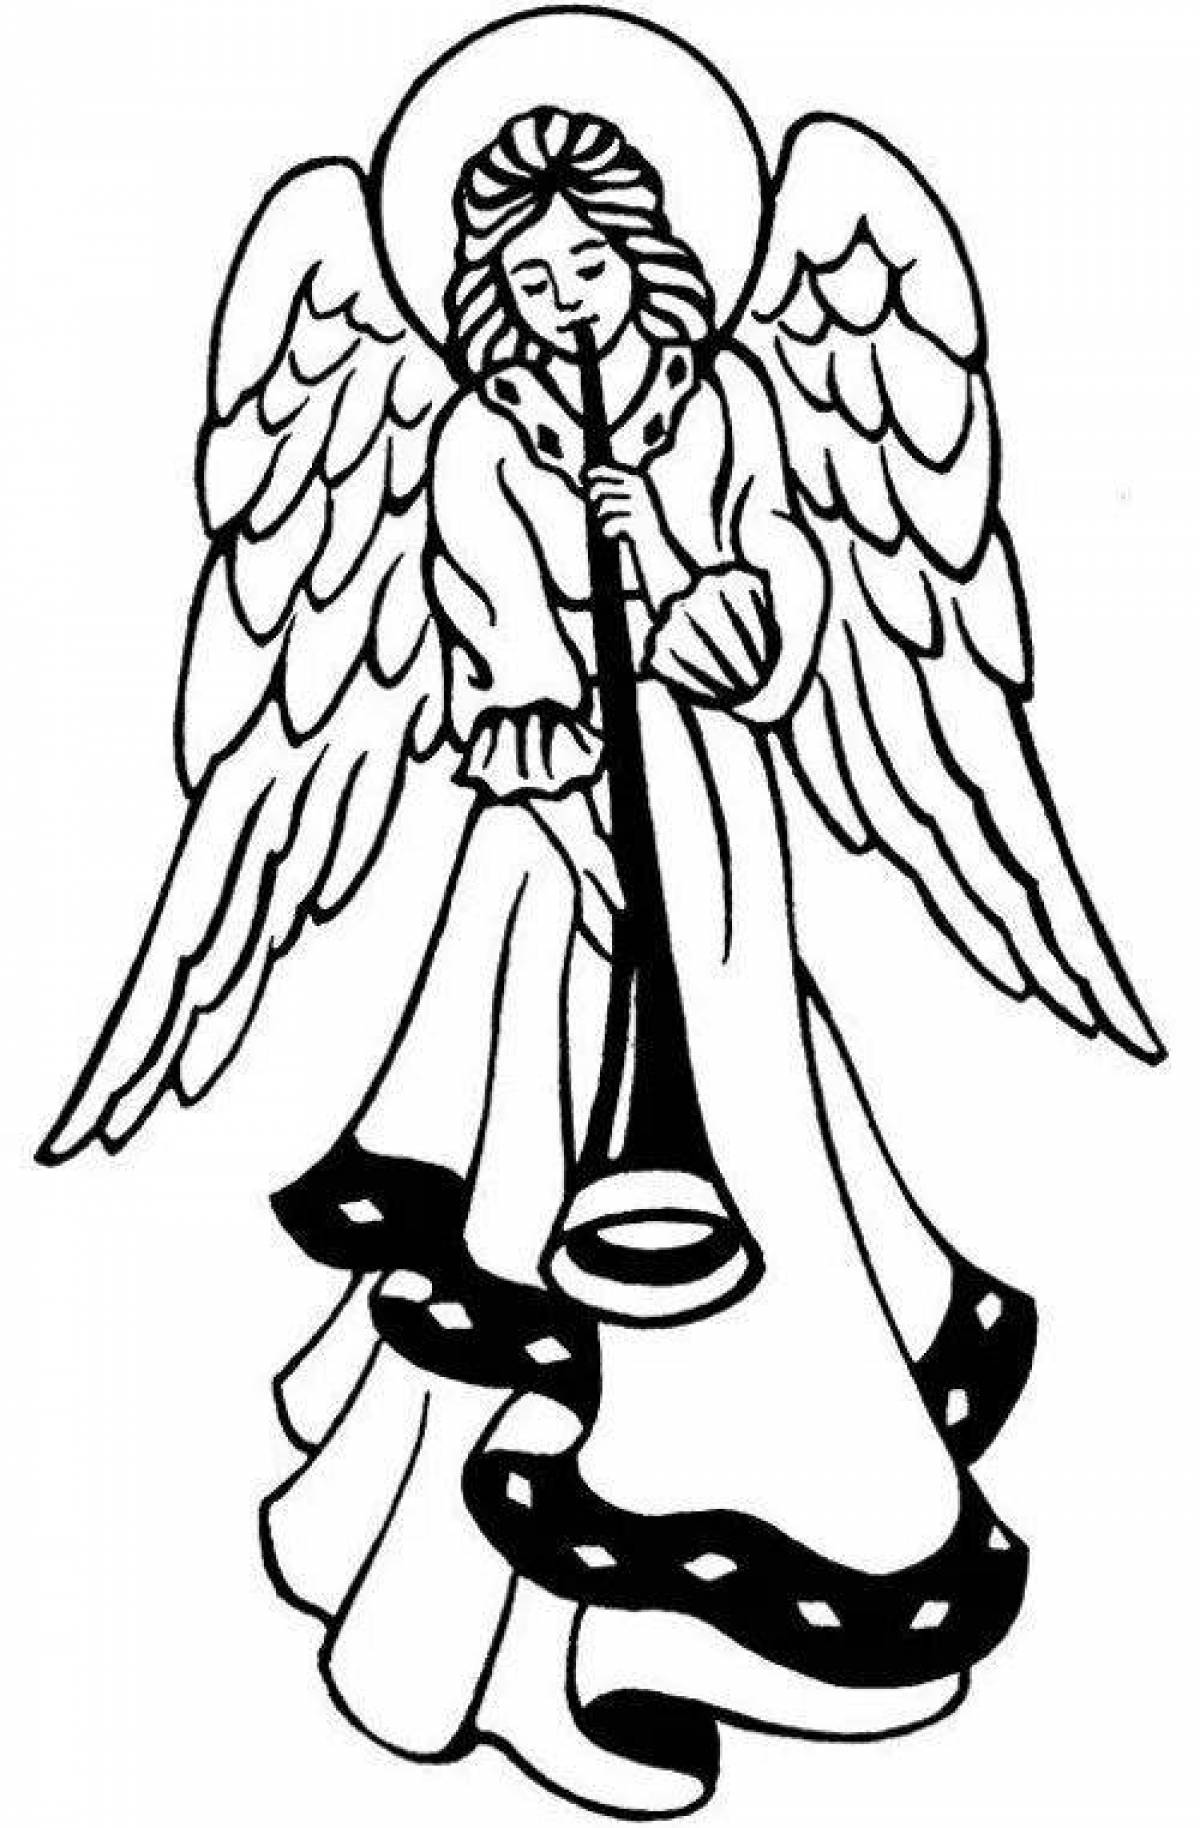 Exquisite guardian angel coloring book